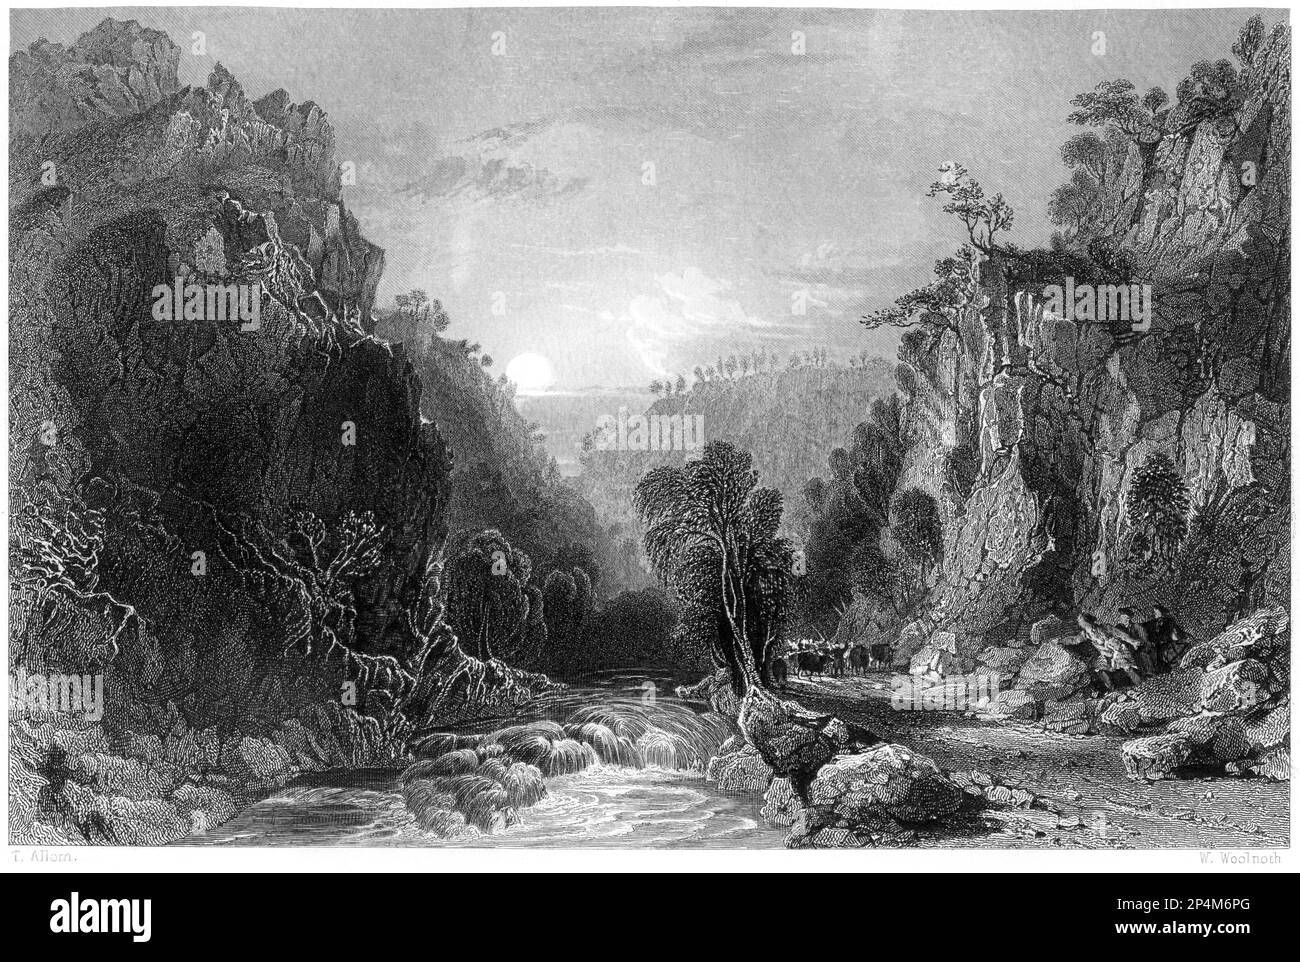 An engraving of The Pass of Inverfarrakaig, (Inverfarigaig) Inverness-shire, Scotland UK scanned at high resolution from a book printed in 1840. Stock Photo